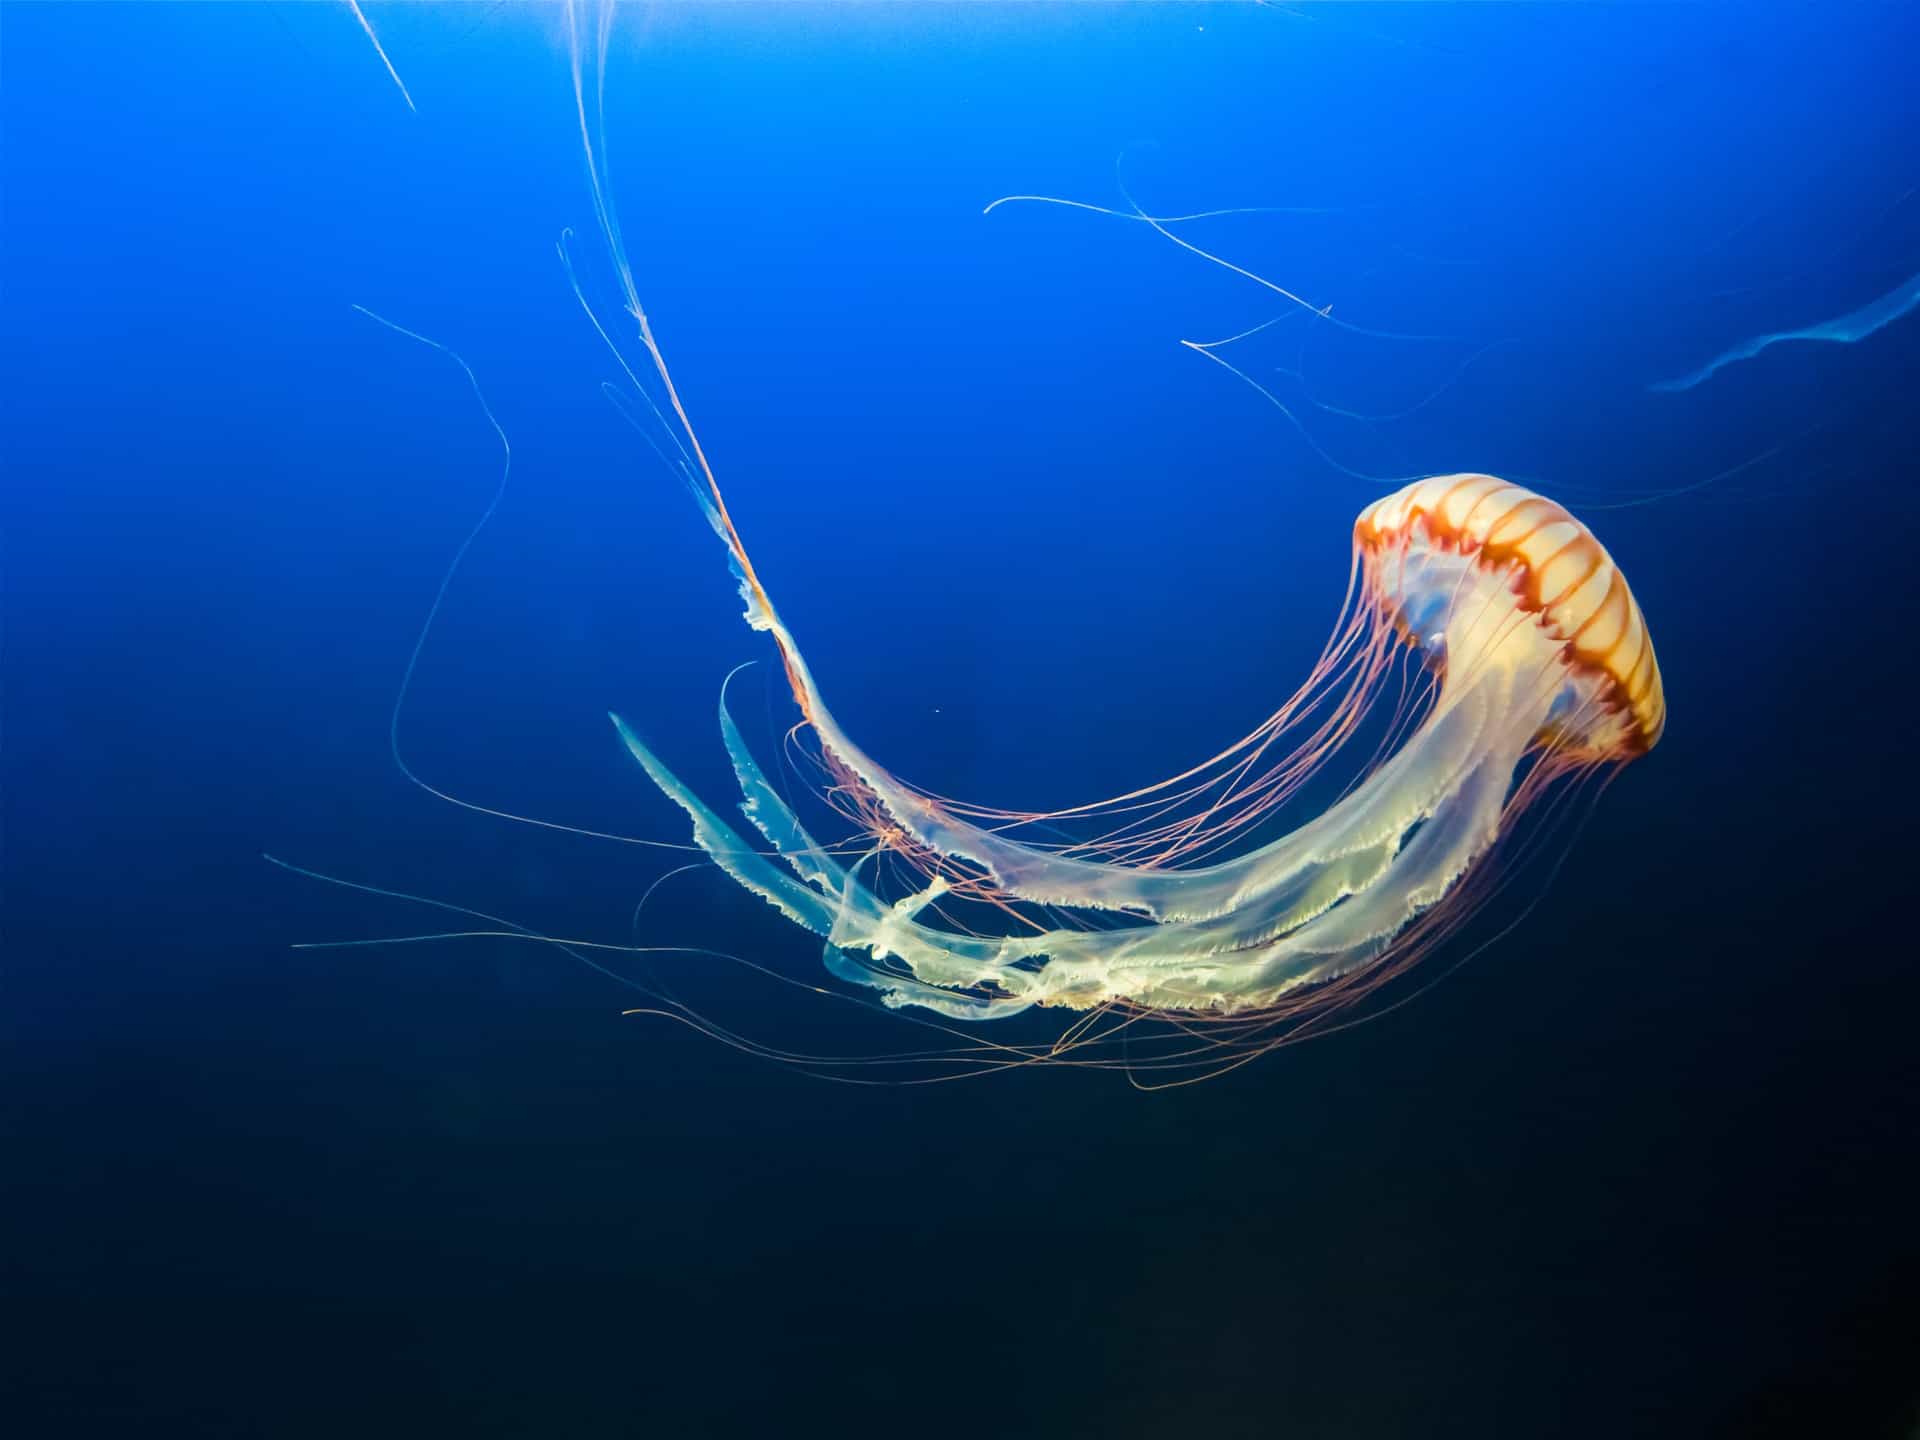 40 Fascinating Jellyfish Facts: Interesting Things About One Of The Sea